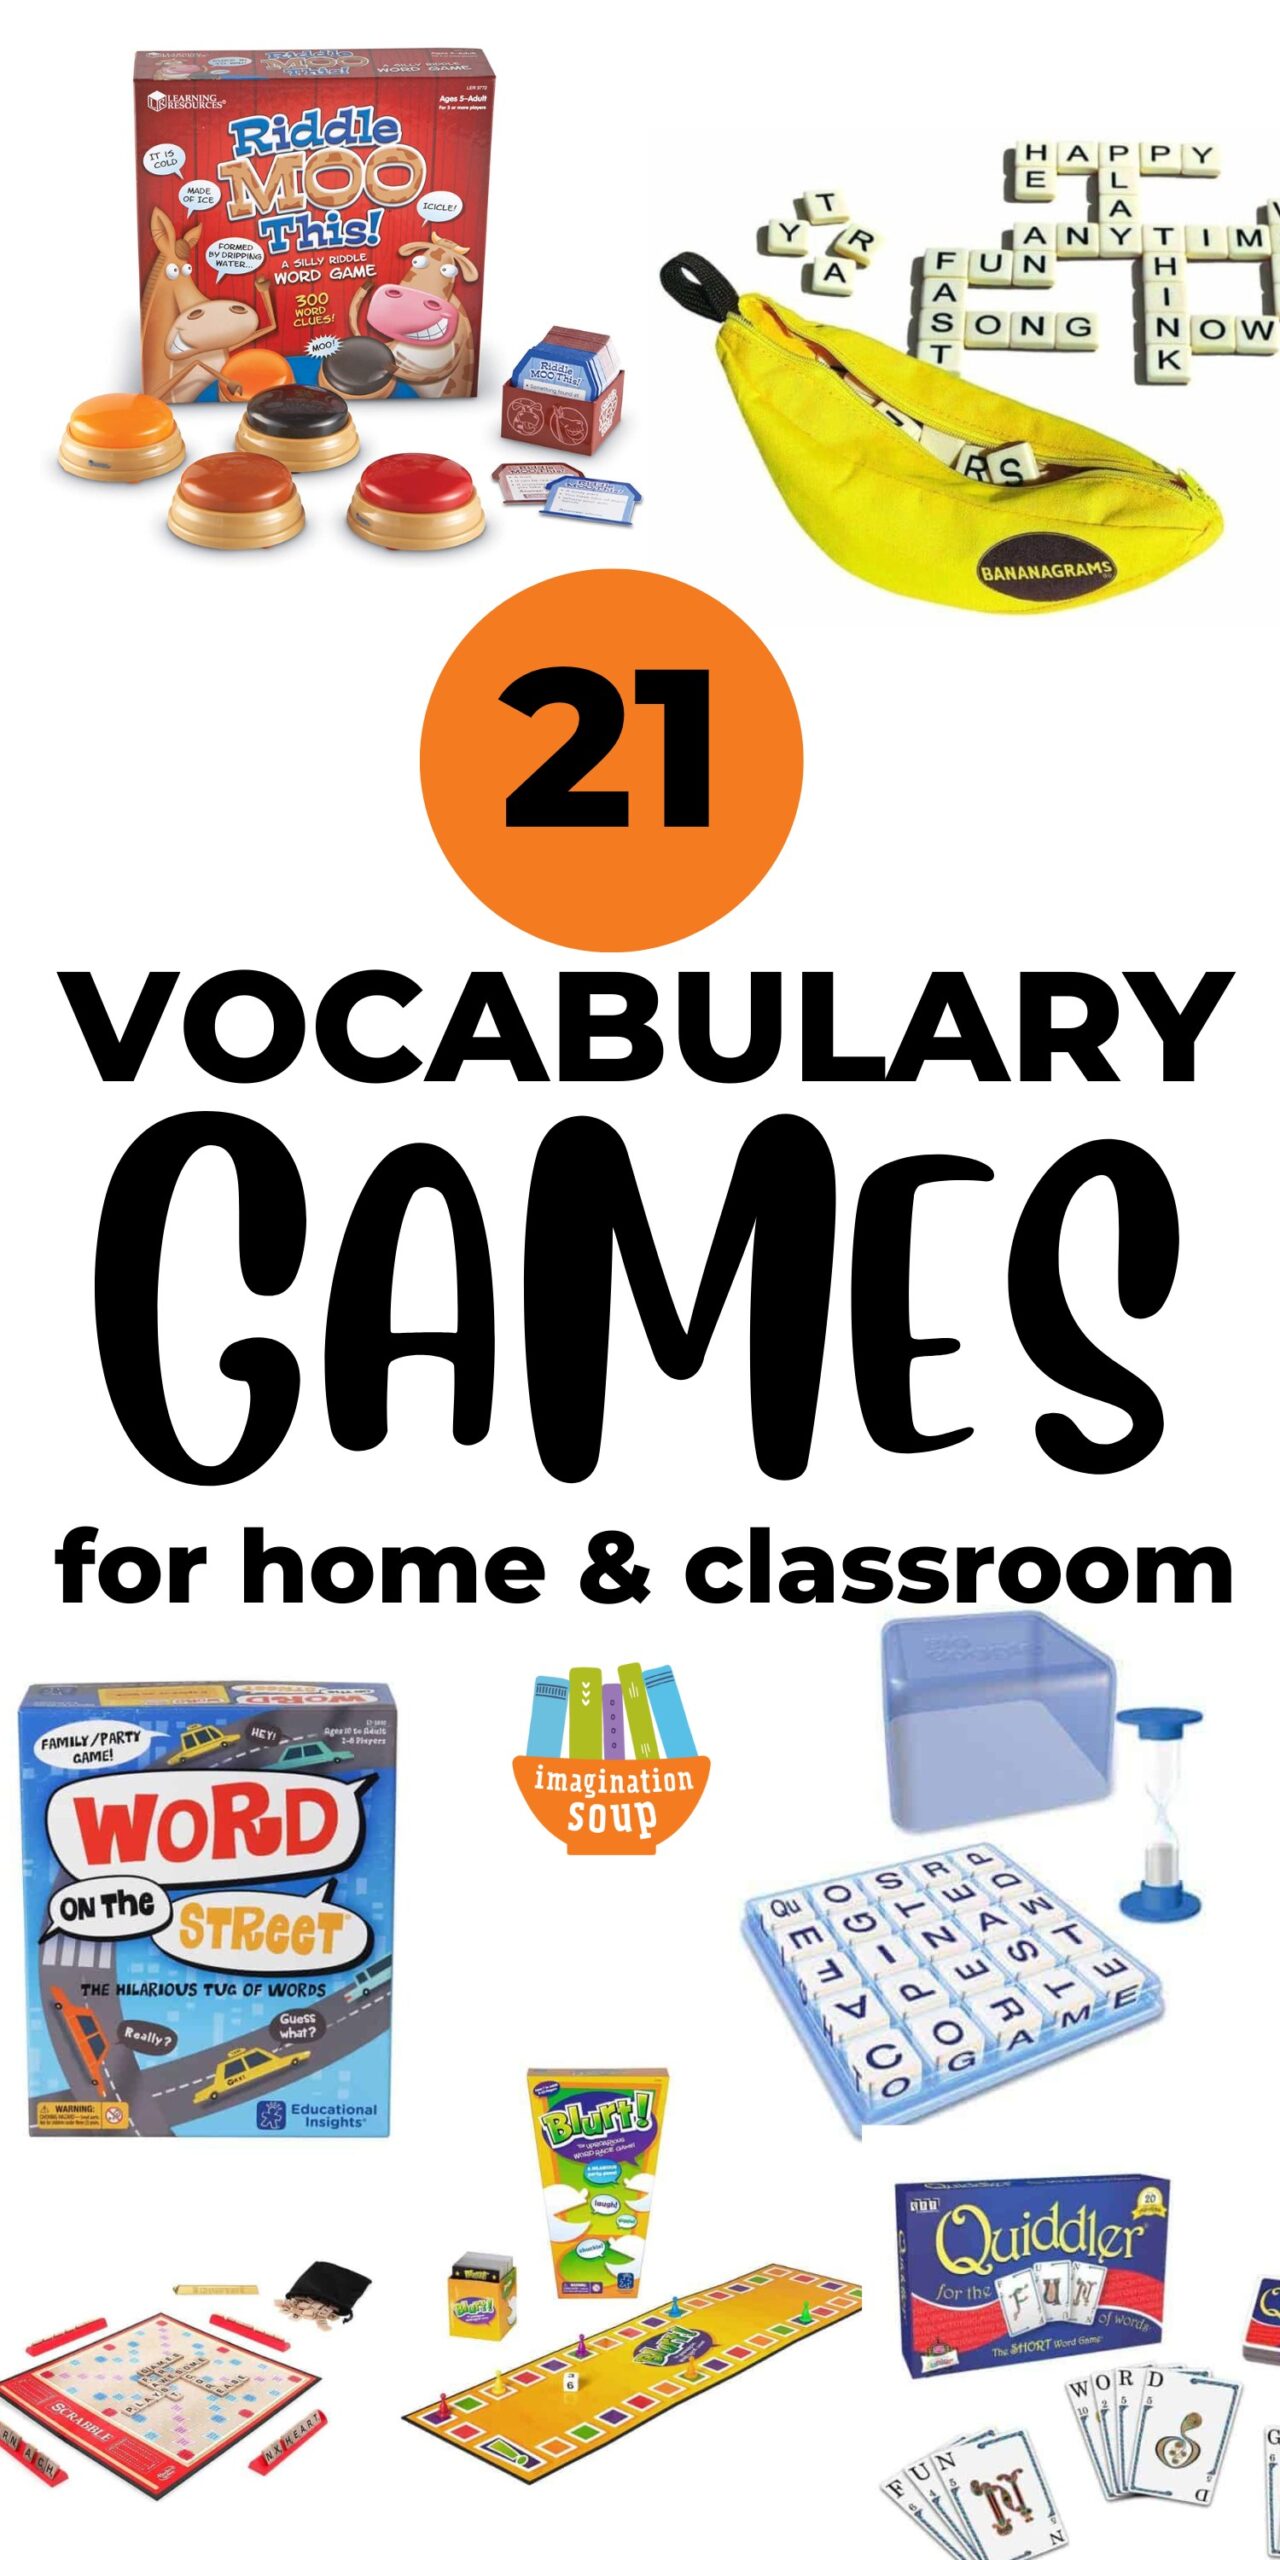 Vocabulary games give kids the playful practice of learning new vocabulary words and their spelling. Playing vocabulary games at home or in the classroom makes learning fun and engaging and helps the information stick in a child's long-term memory.